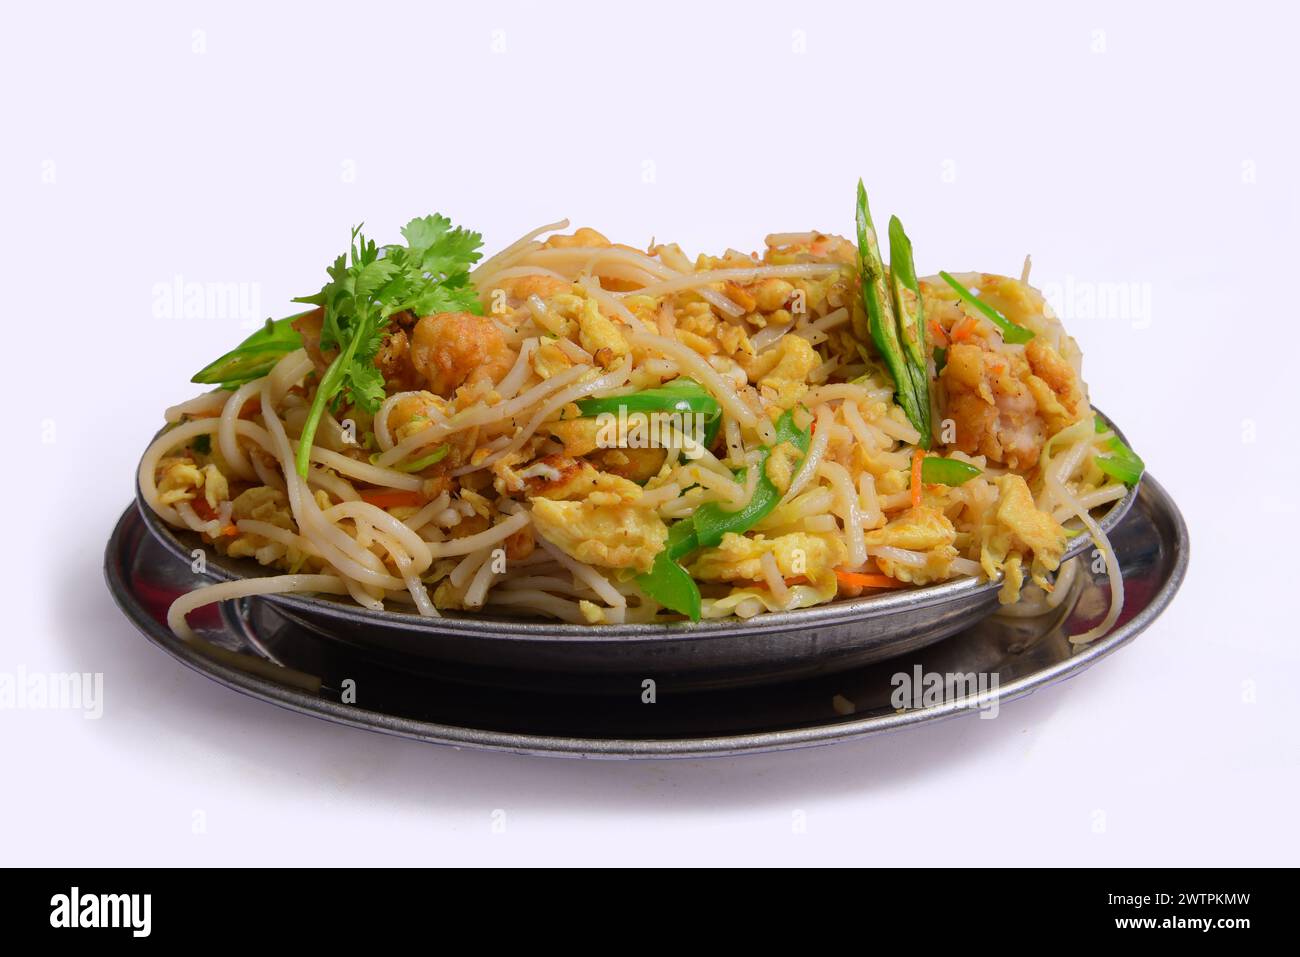 Chicken noodles are a delicious, flavor-packed meal of stir-fried noodles, chicken, vegetables, and sauces garnished with coriander served on a plate. Stock Photo